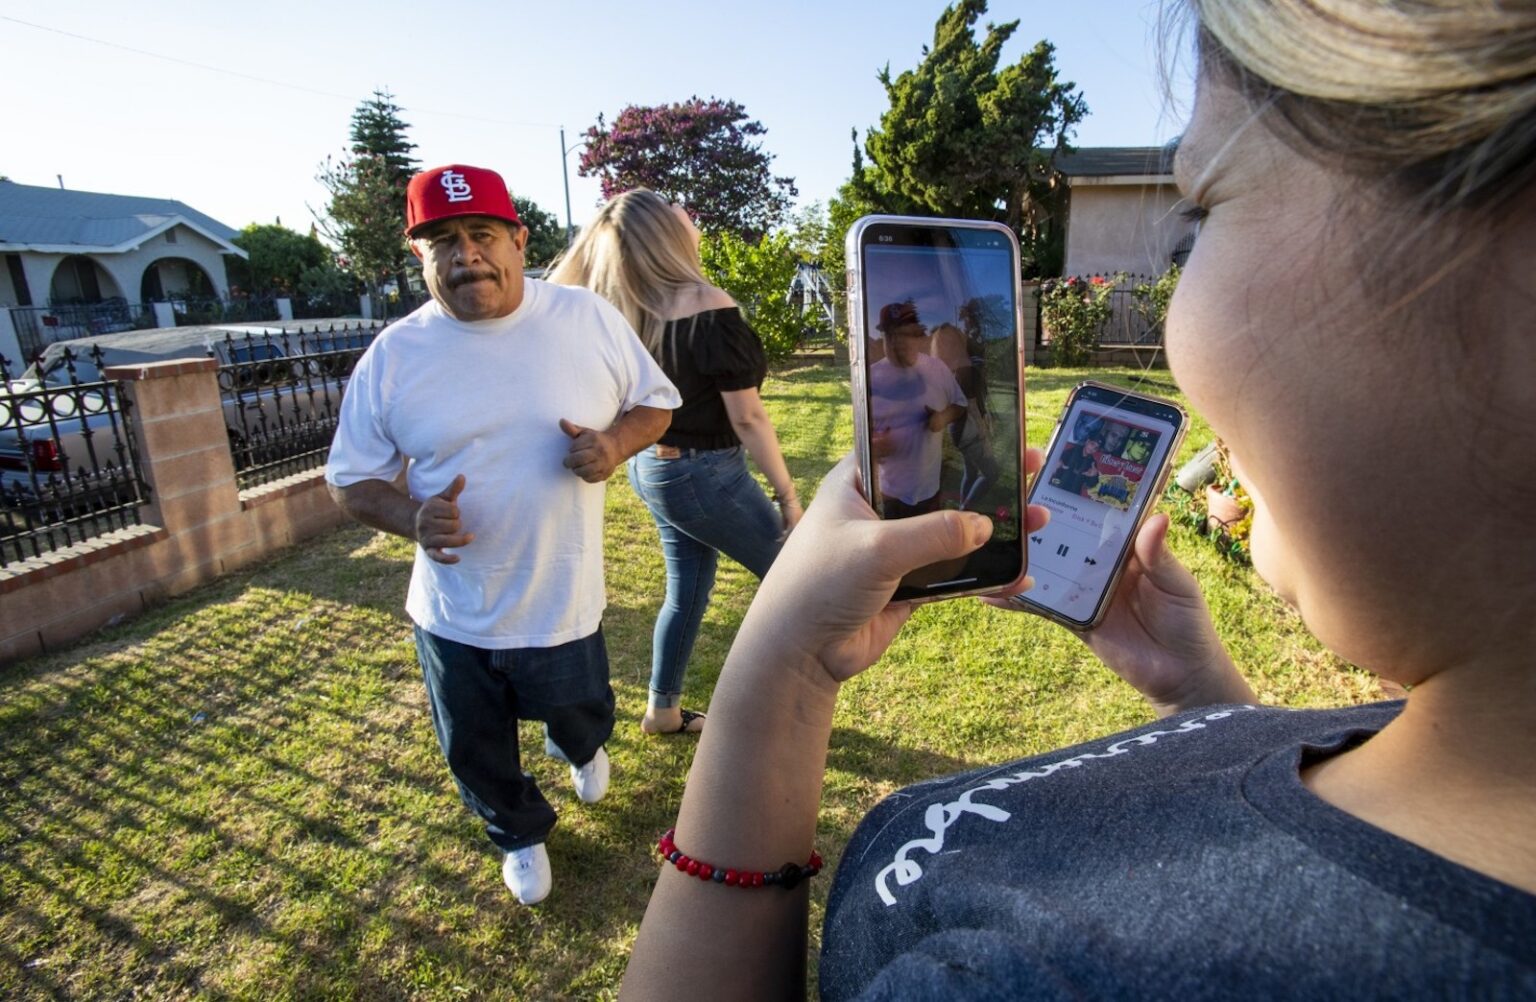 Younger generations may think they own social media – but the recent TikTok trend of parents roasting their kids says otherwise. Here's why.